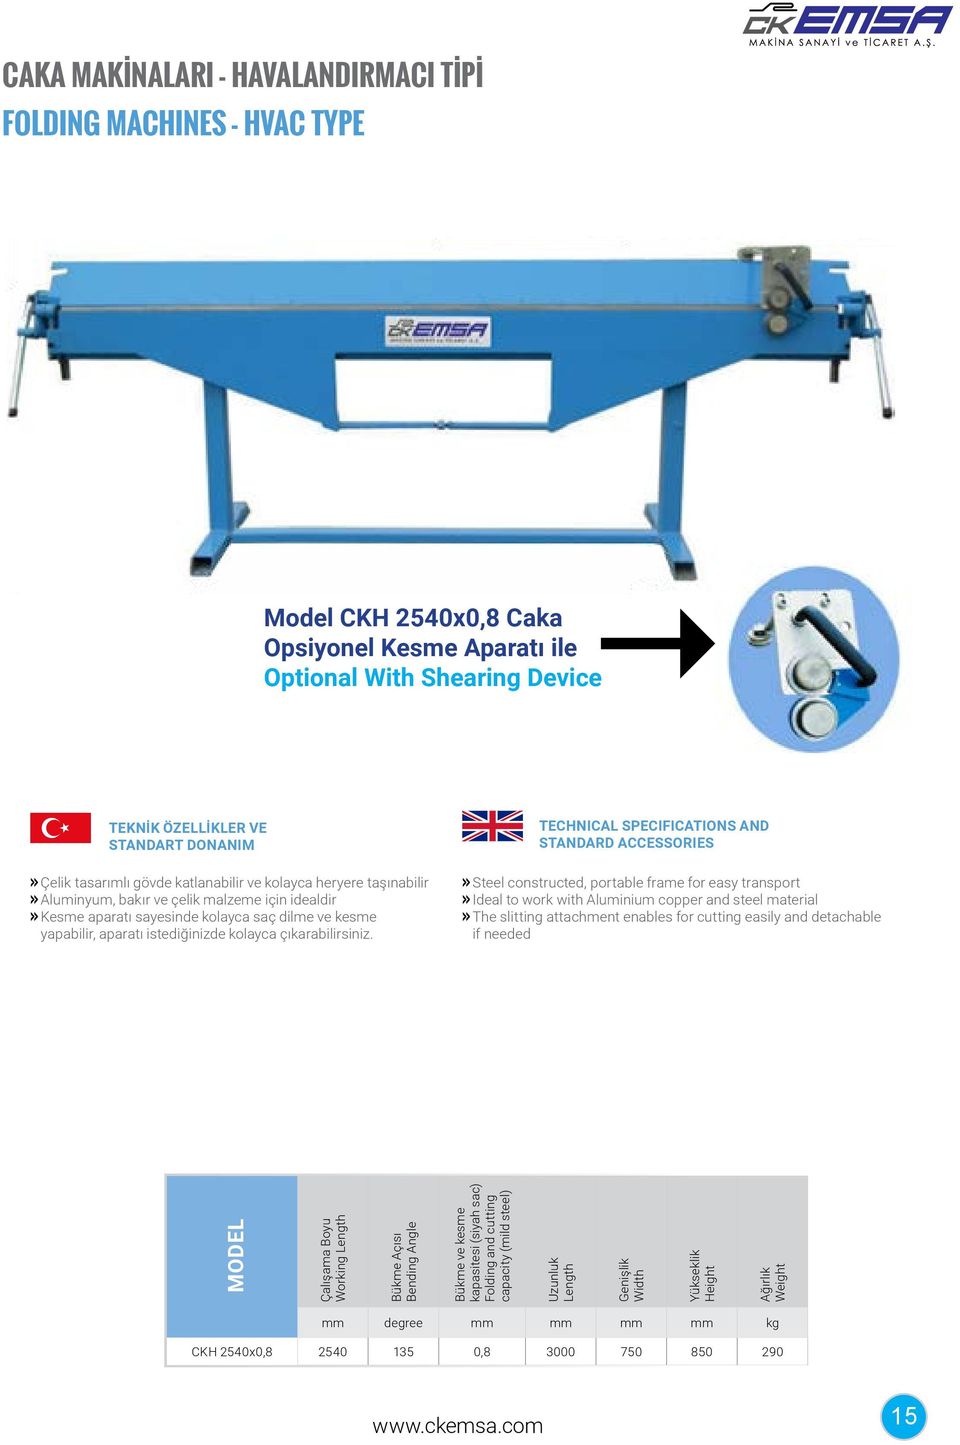 Steel constructed, portable frame for easy transport Ideal to work with Aluminium copper and steel material The slitting attachment enables for cutting easily and detachable if needed Çalışama